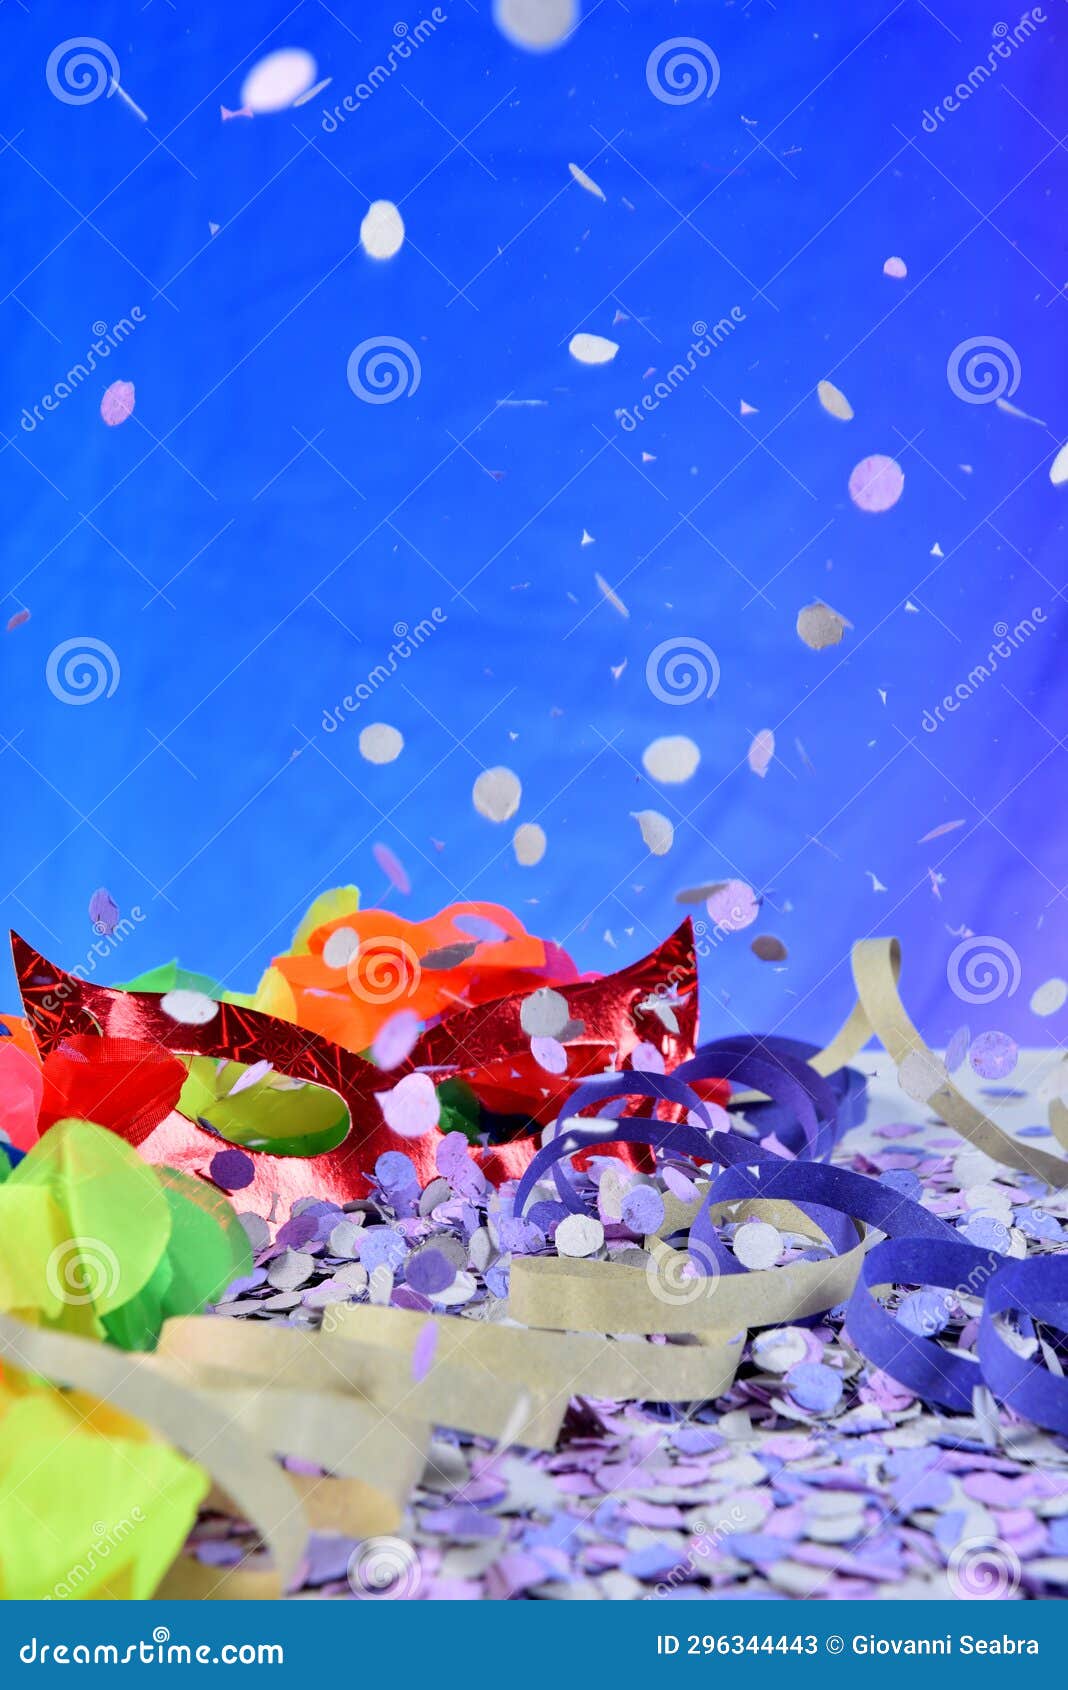 red carnival costume mask with colorful confetti and streamers joyful brazilian party celebration on white background with space